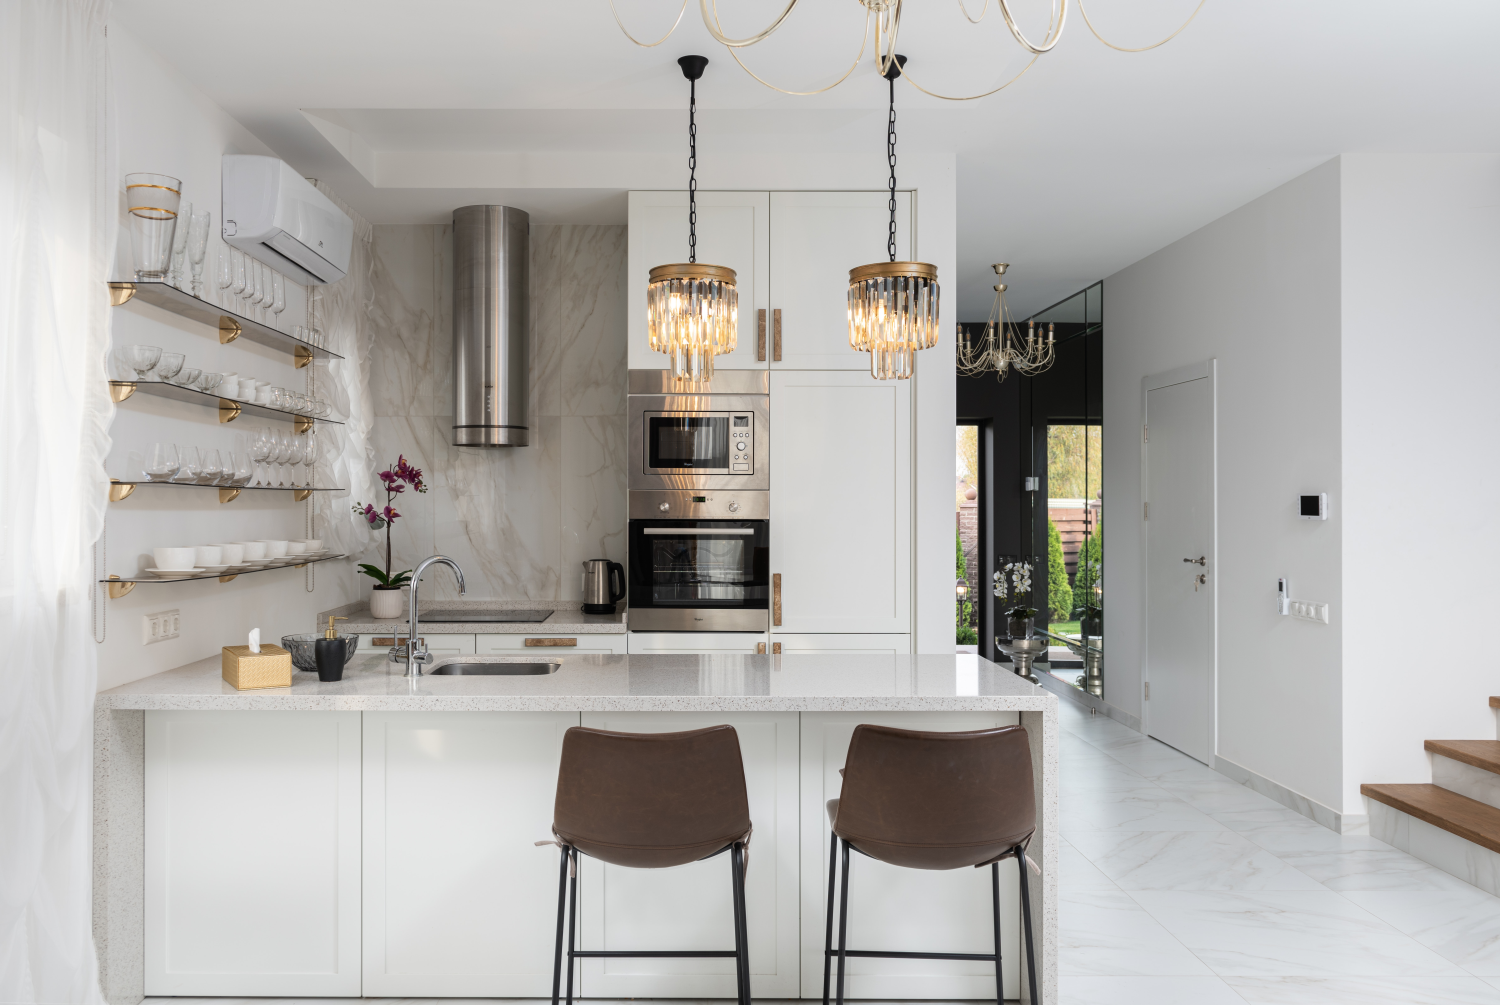 Go Creative With Design: 6 Tips For Your Next Kitchen Remodel | Uncustomary